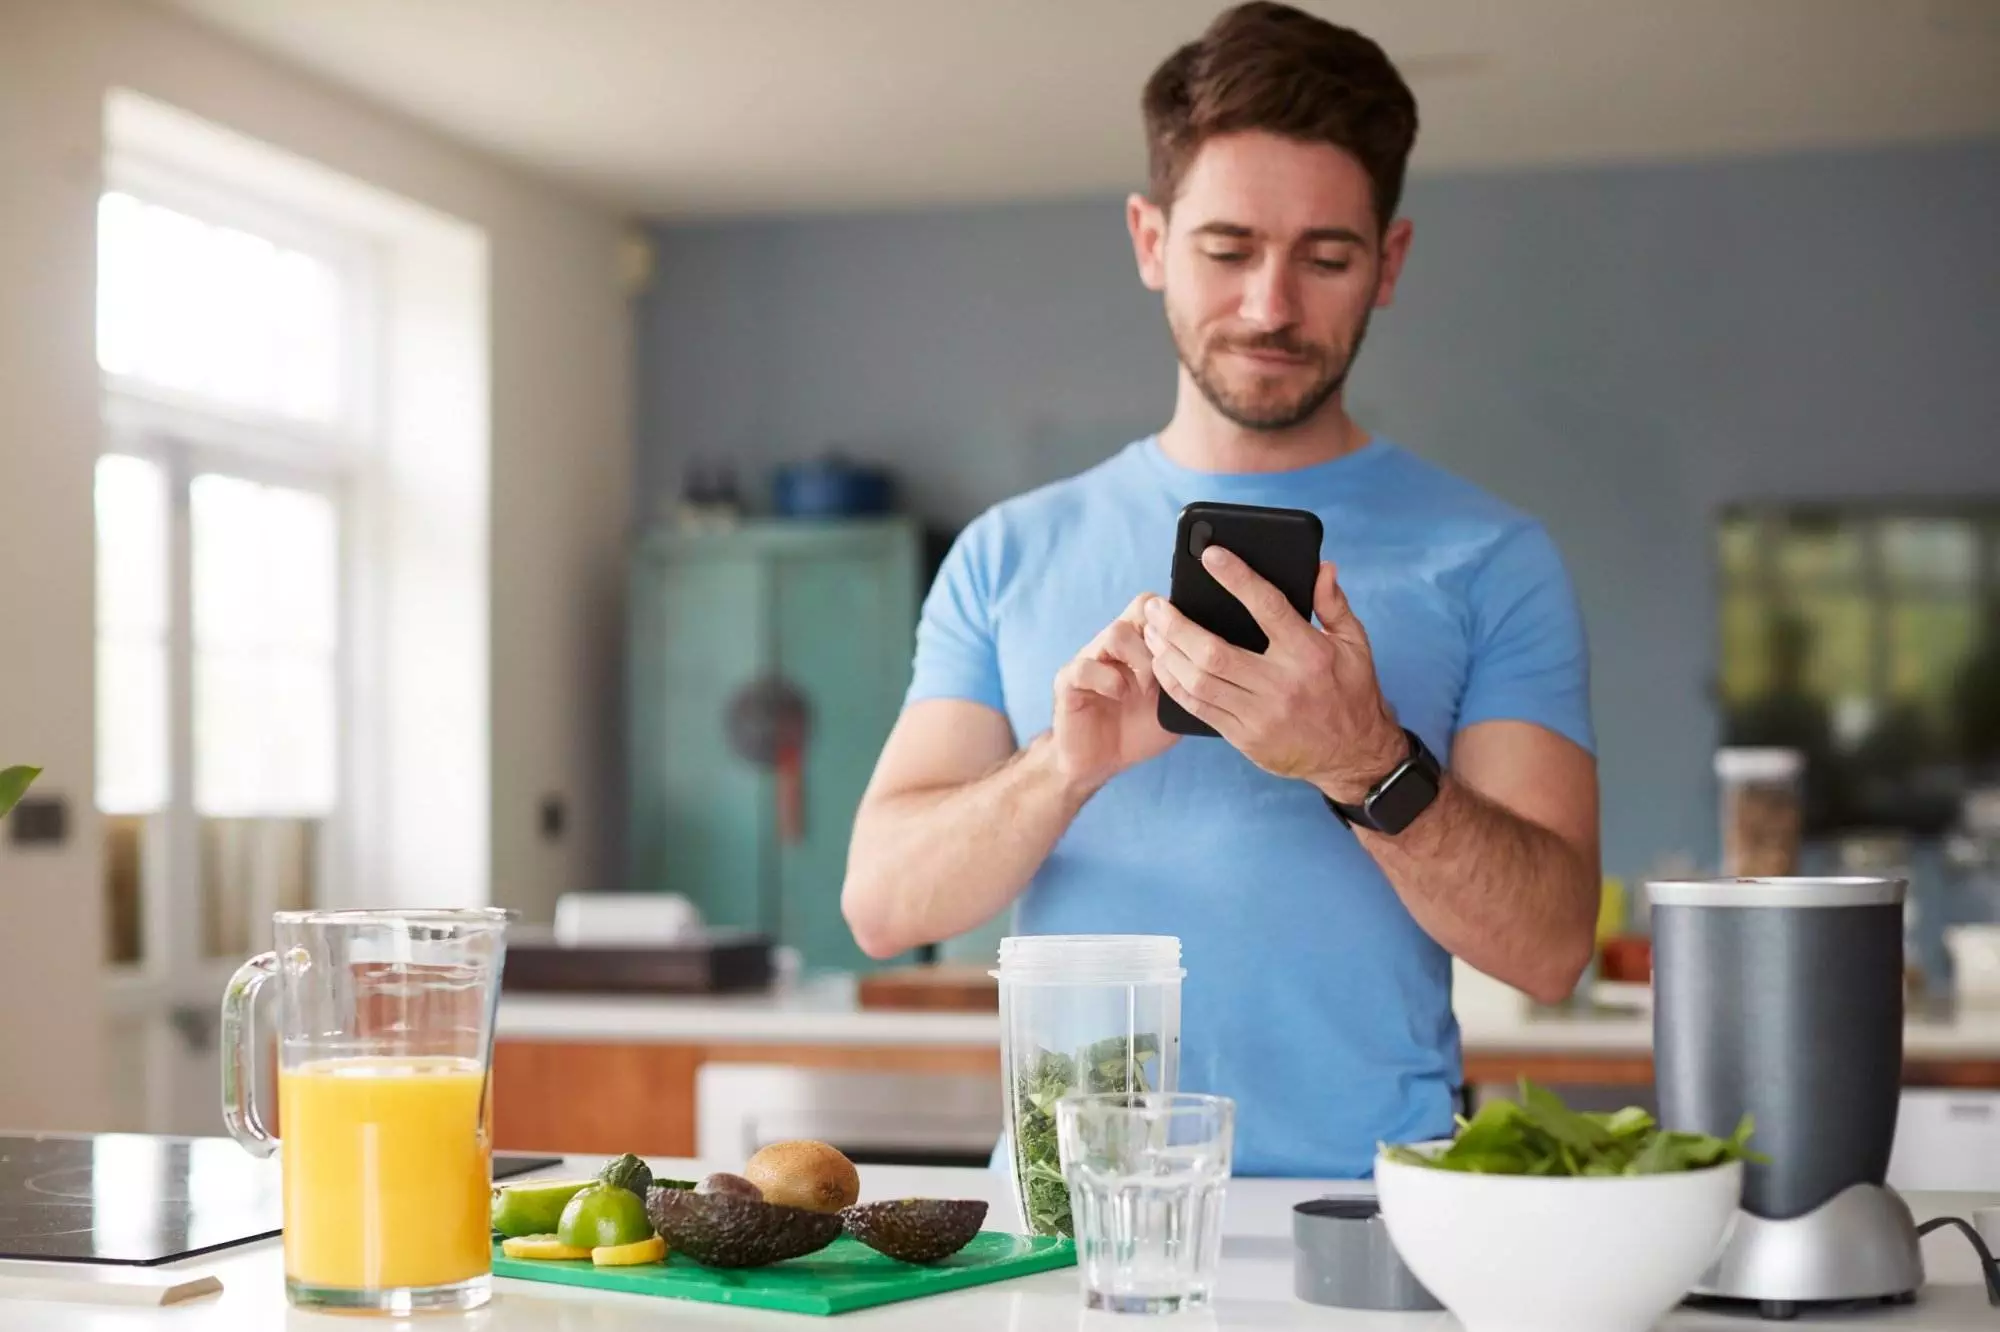 Man using smartphone fitness and diet app in kitchen with healthy food.